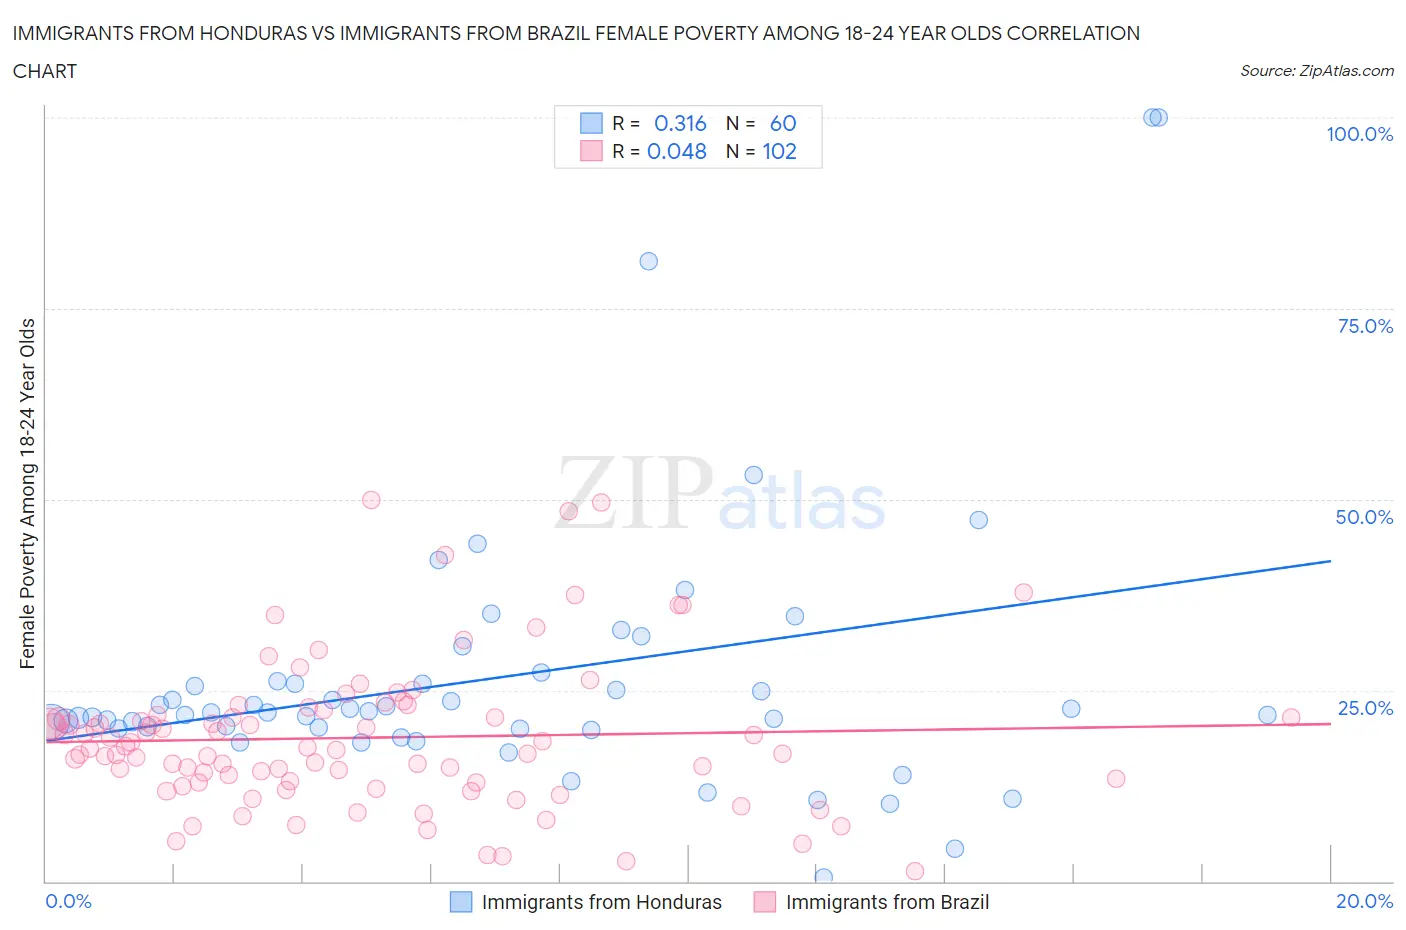 Immigrants from Honduras vs Immigrants from Brazil Female Poverty Among 18-24 Year Olds